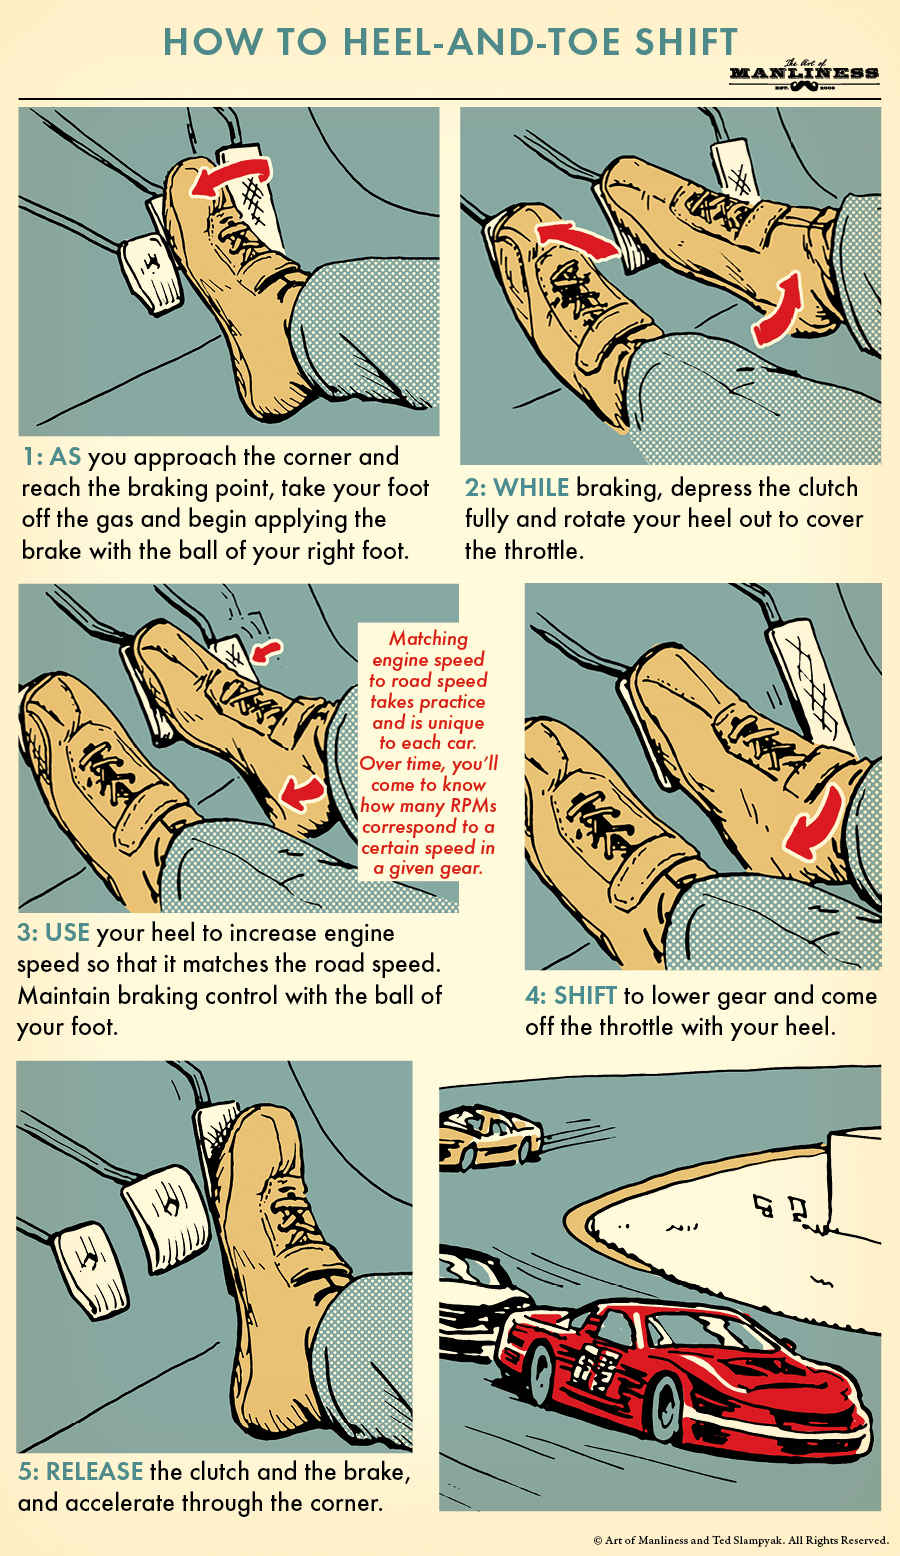 Poster regarding how to heel-and-toe shift by Art of Manliness.